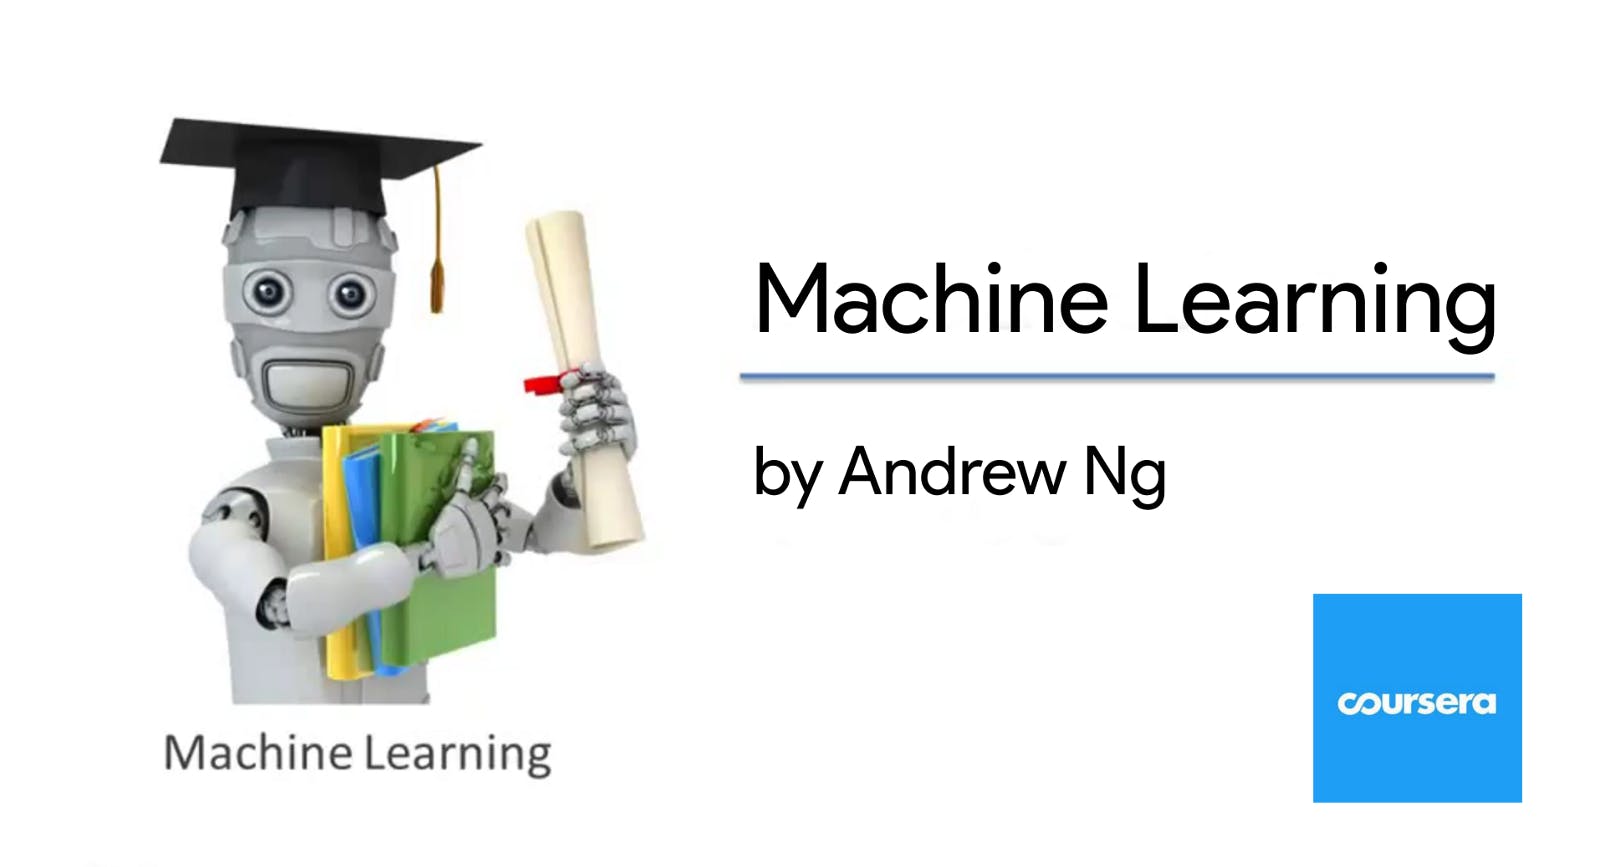 Machine Learning course by Andrew Ng